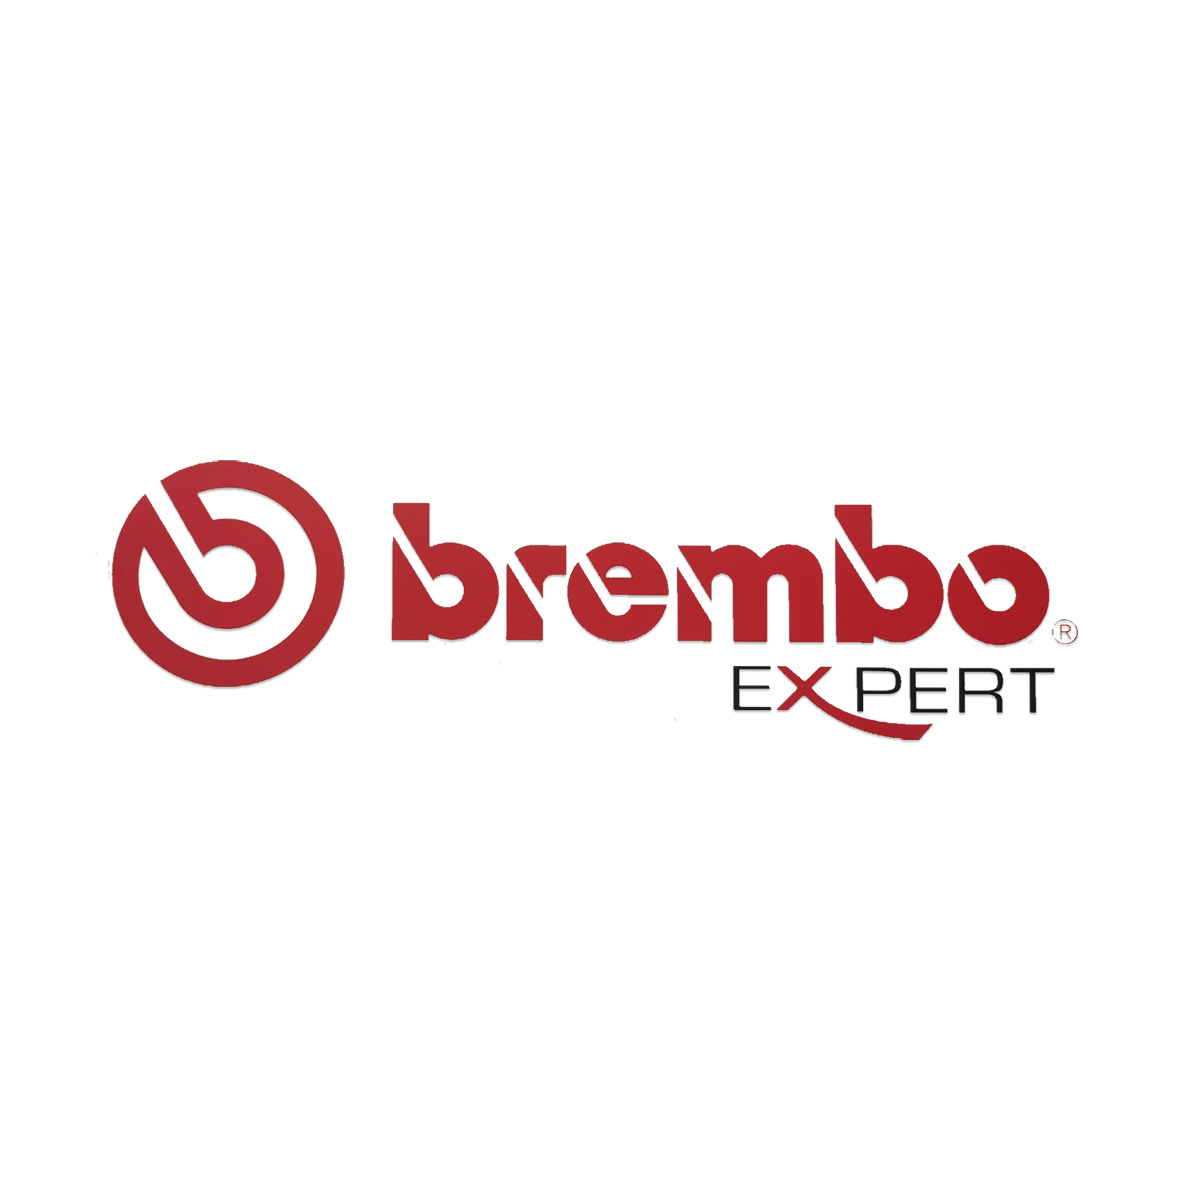 Brembo Experts certification